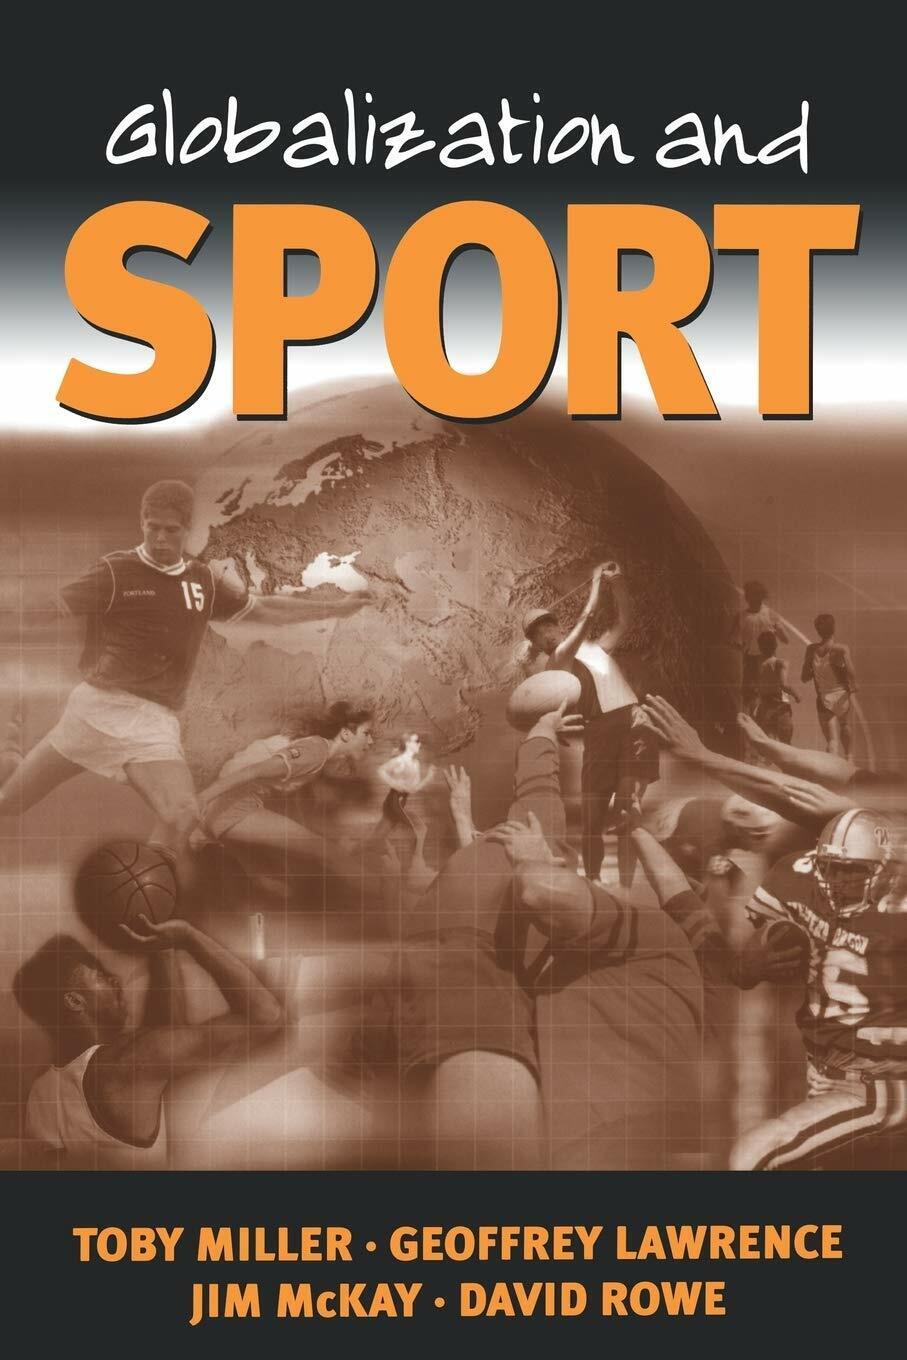 Globalization and Sport - Toby Miller, Geoffrey A. Lawrence, Jim McKay - 2021